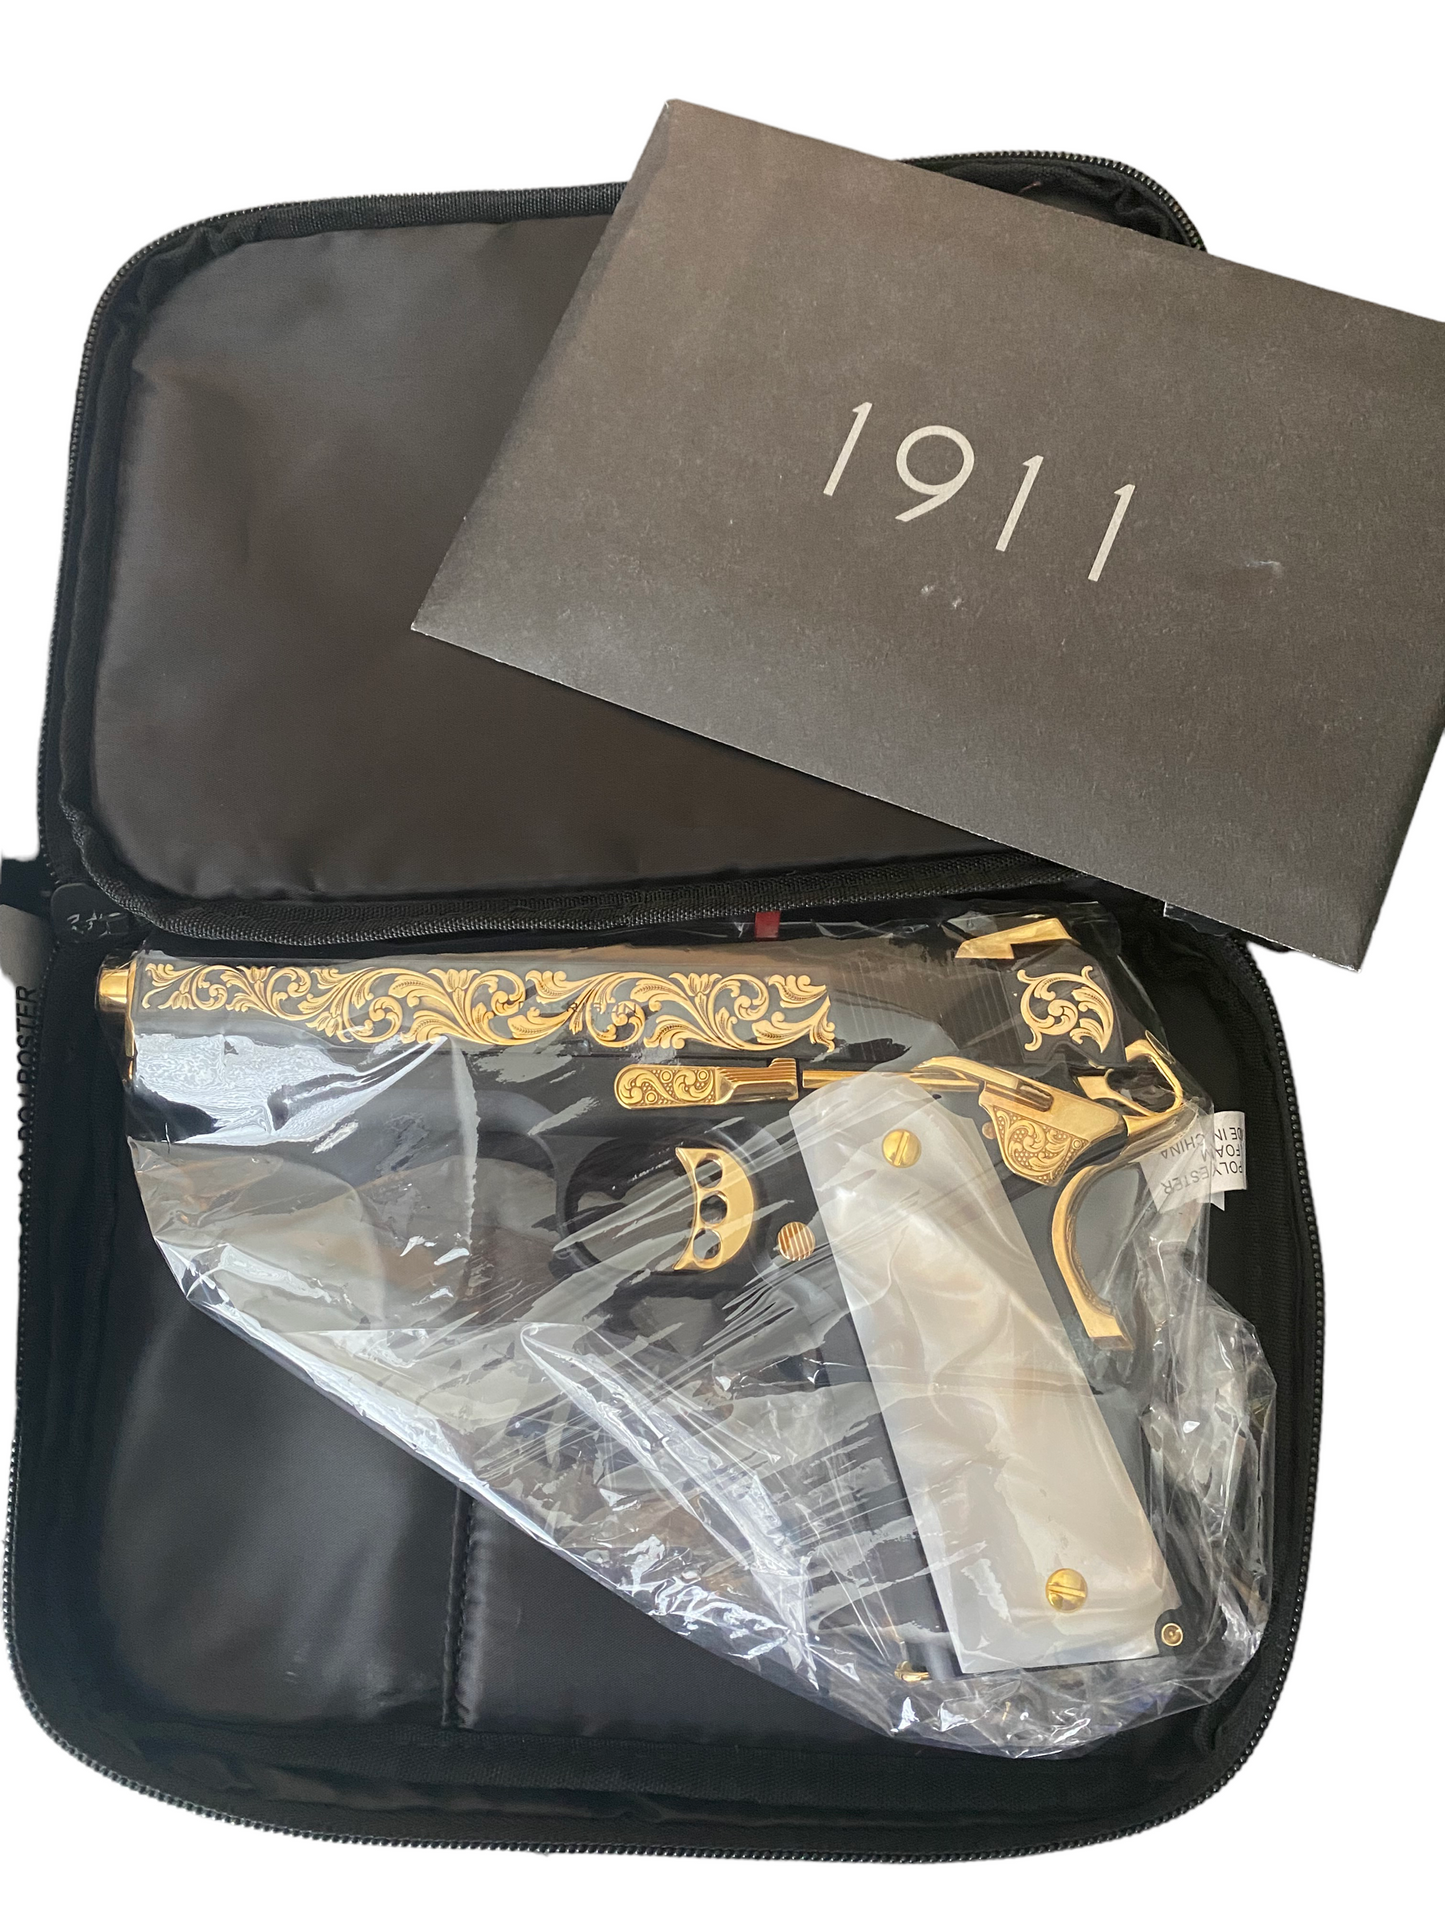 SPRINGFIELD GARRISON 1911 ENGRAVED 9MM WITH 24K GOLD ACCENTS